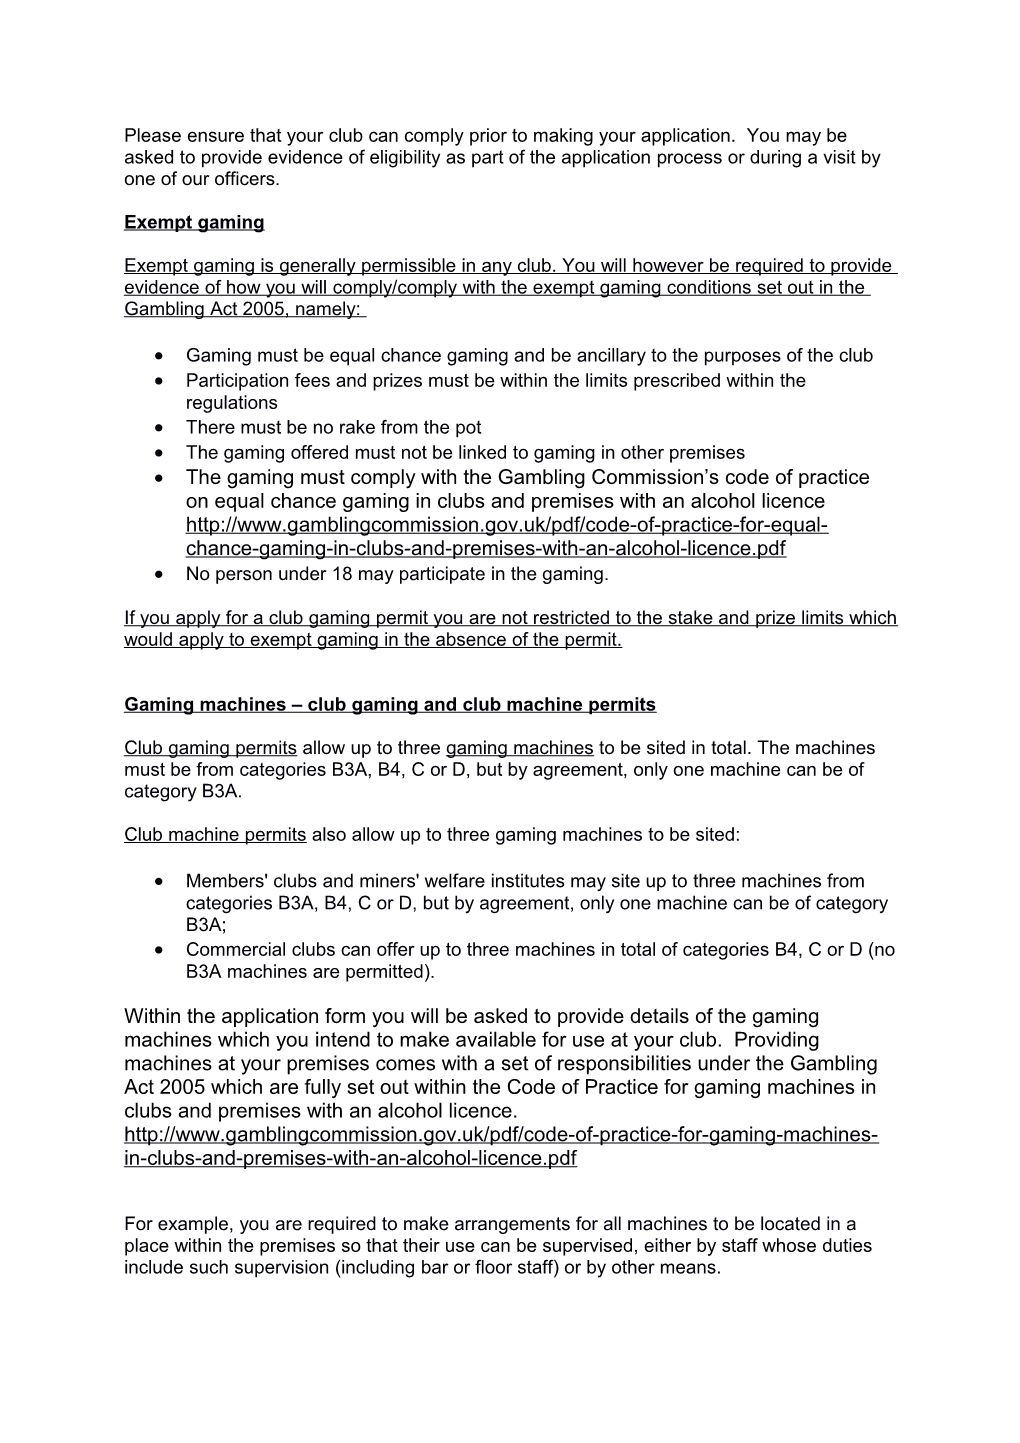 Template Letter for Club Gaming Permit